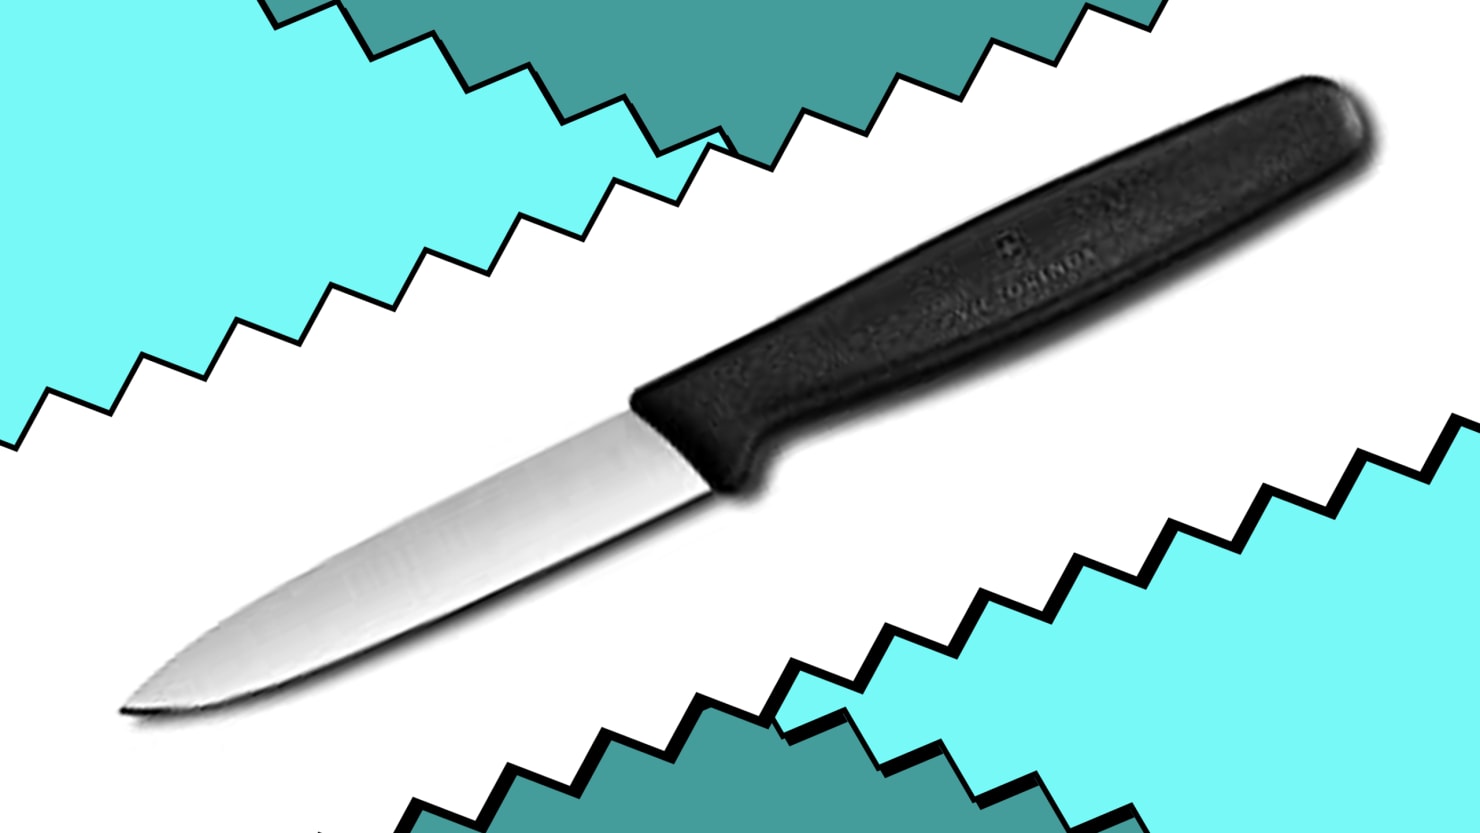 The Case for a Fancy Paring Knife